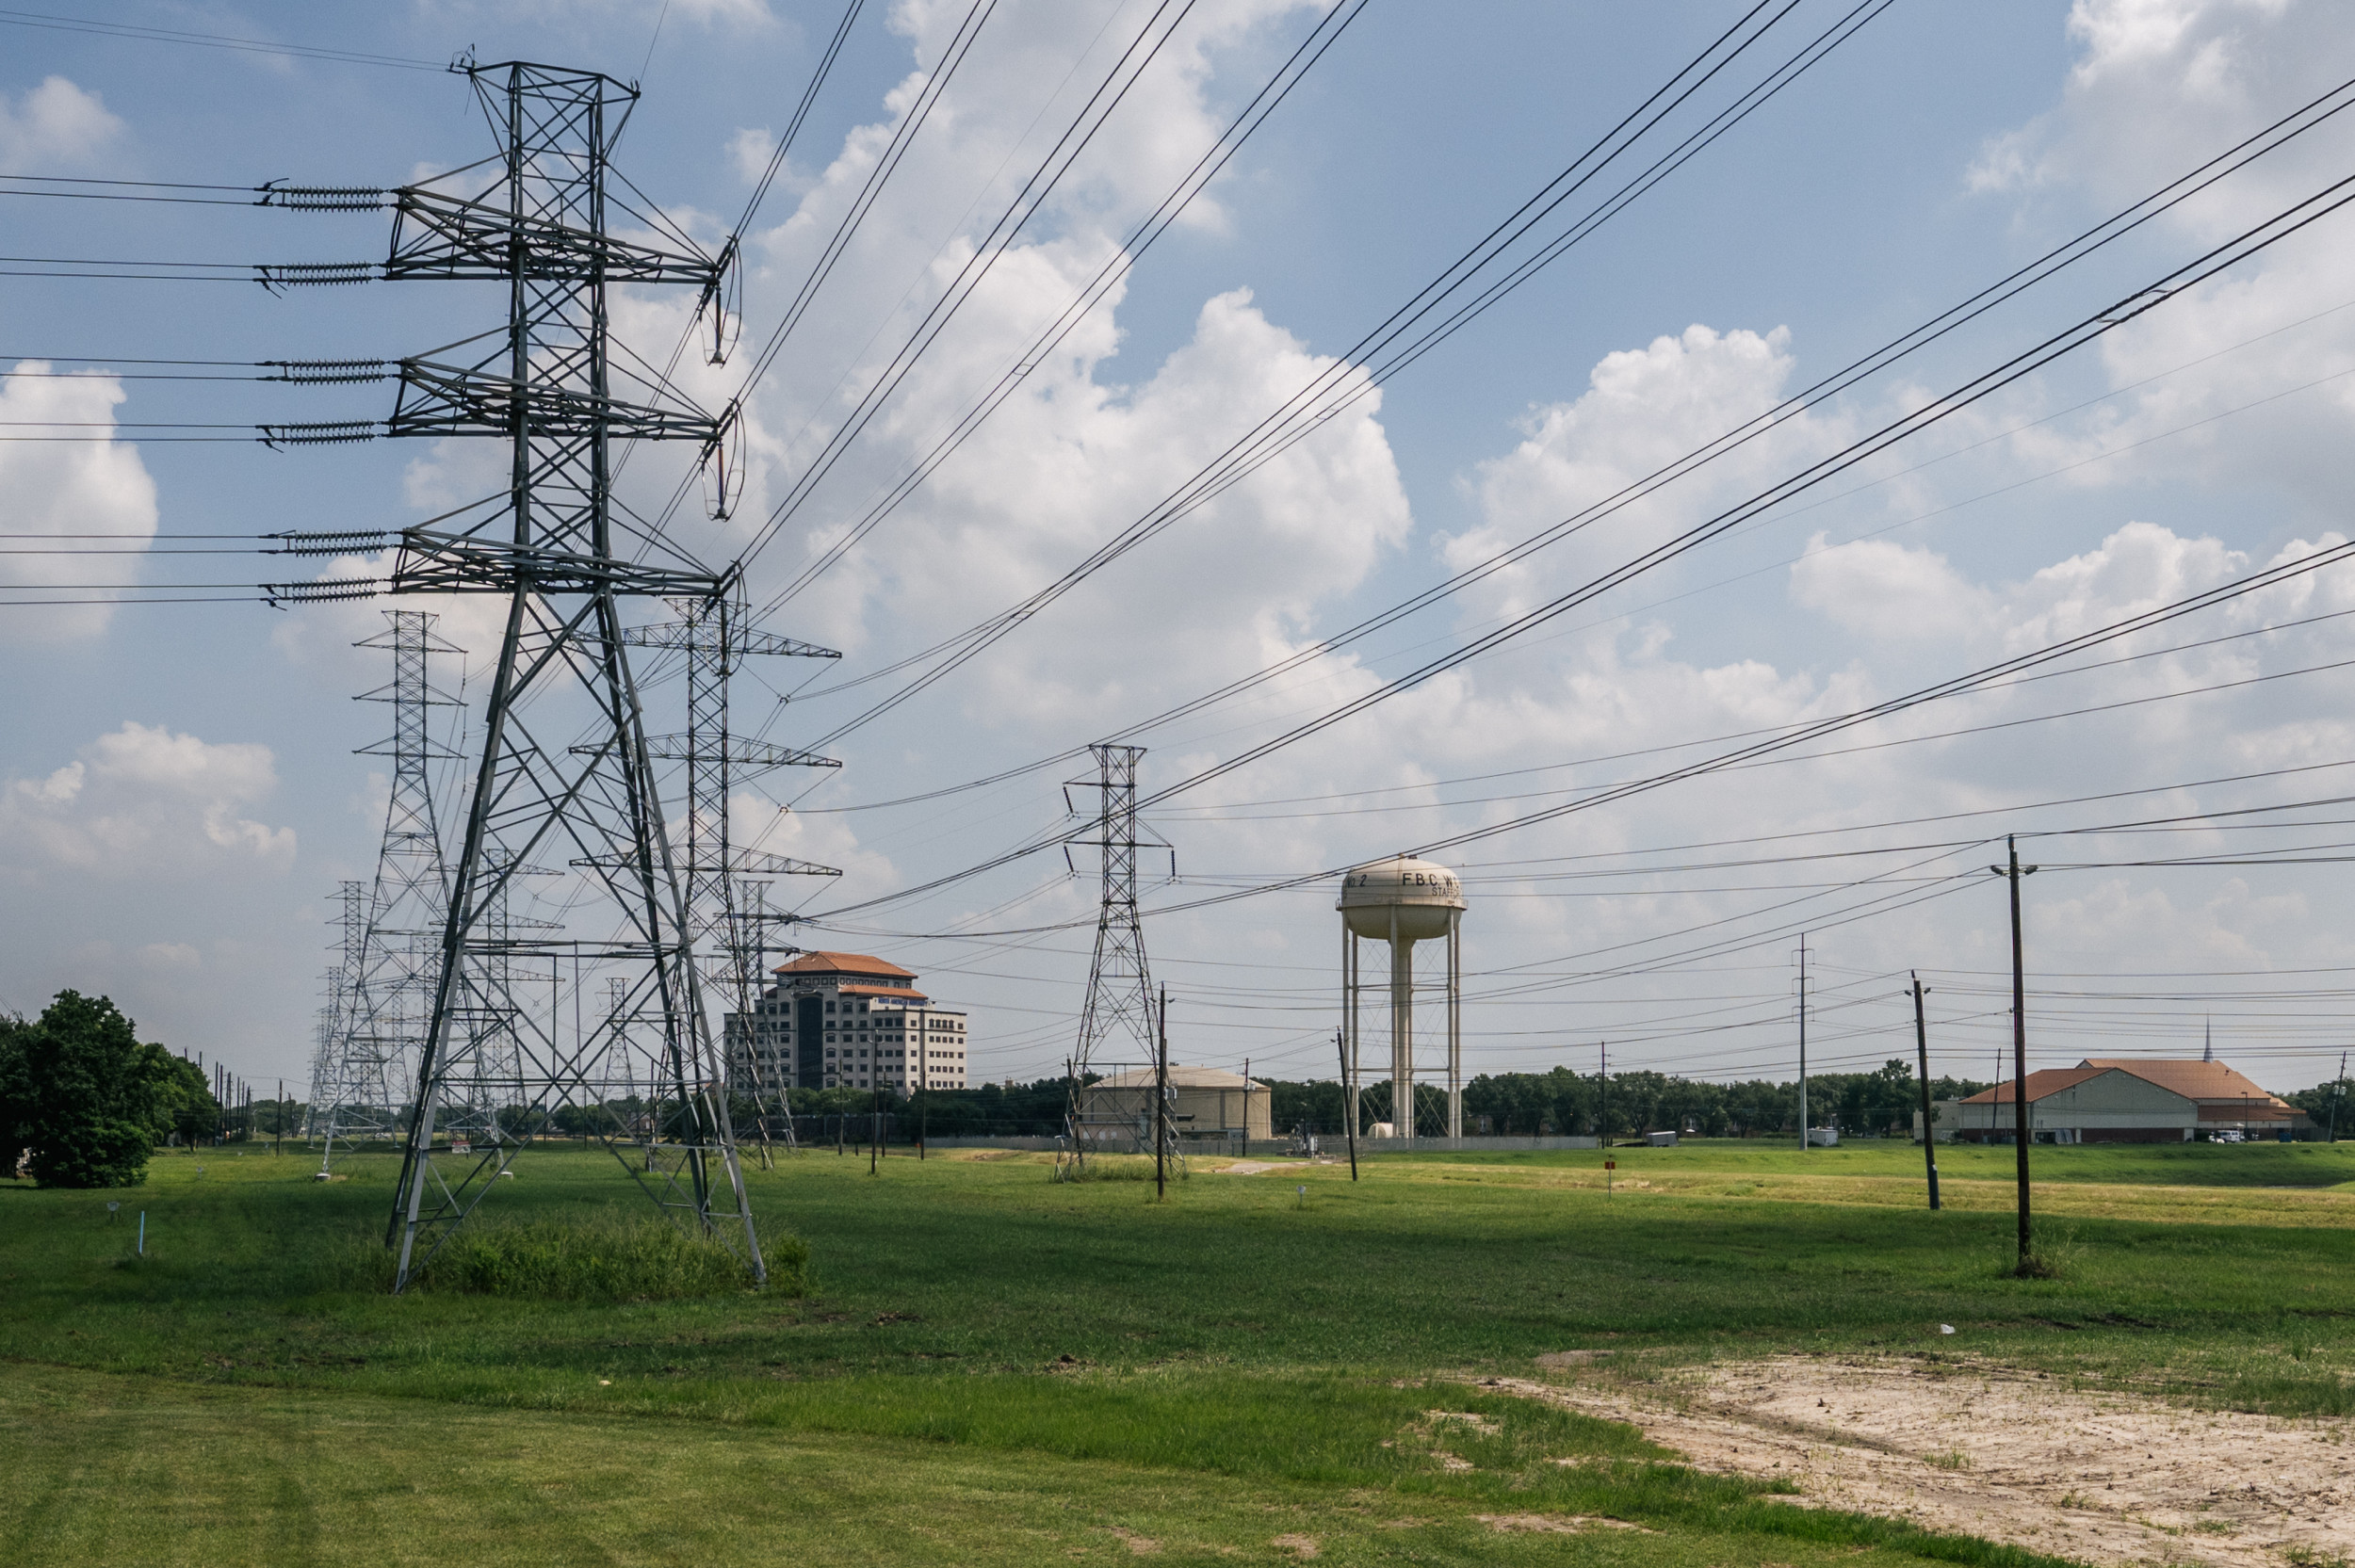 Texas Power Grid Faces 'Emergency' as Early Heat Waves Scorches State